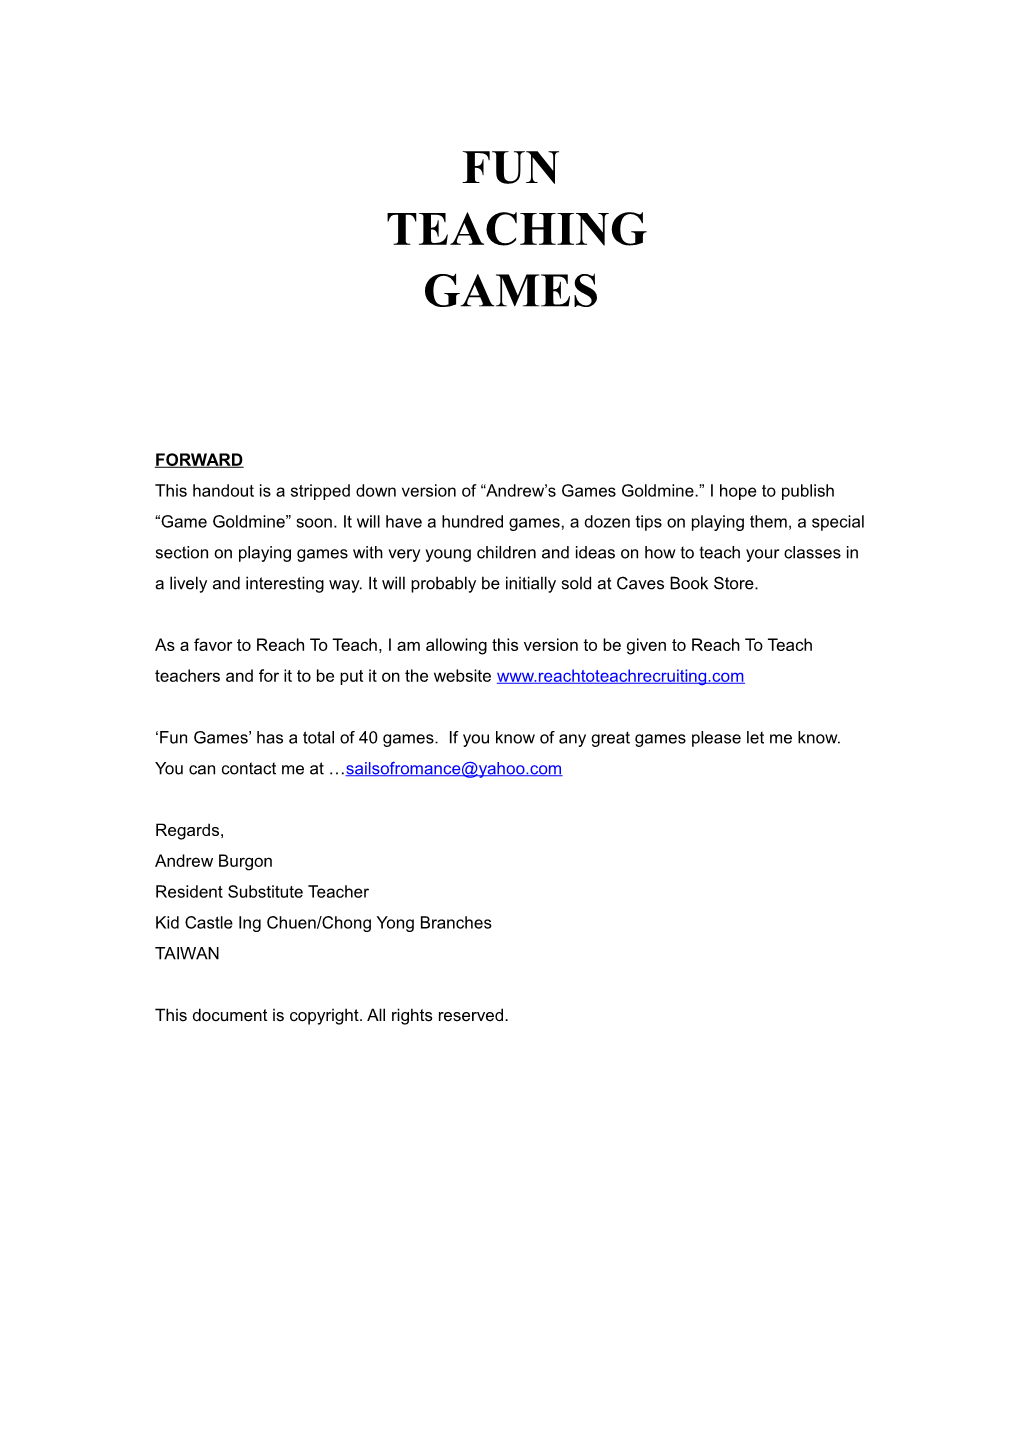 This Handout Is a Stripped Down Version of Andrew S Games Goldmine. I Hope to Publish Game